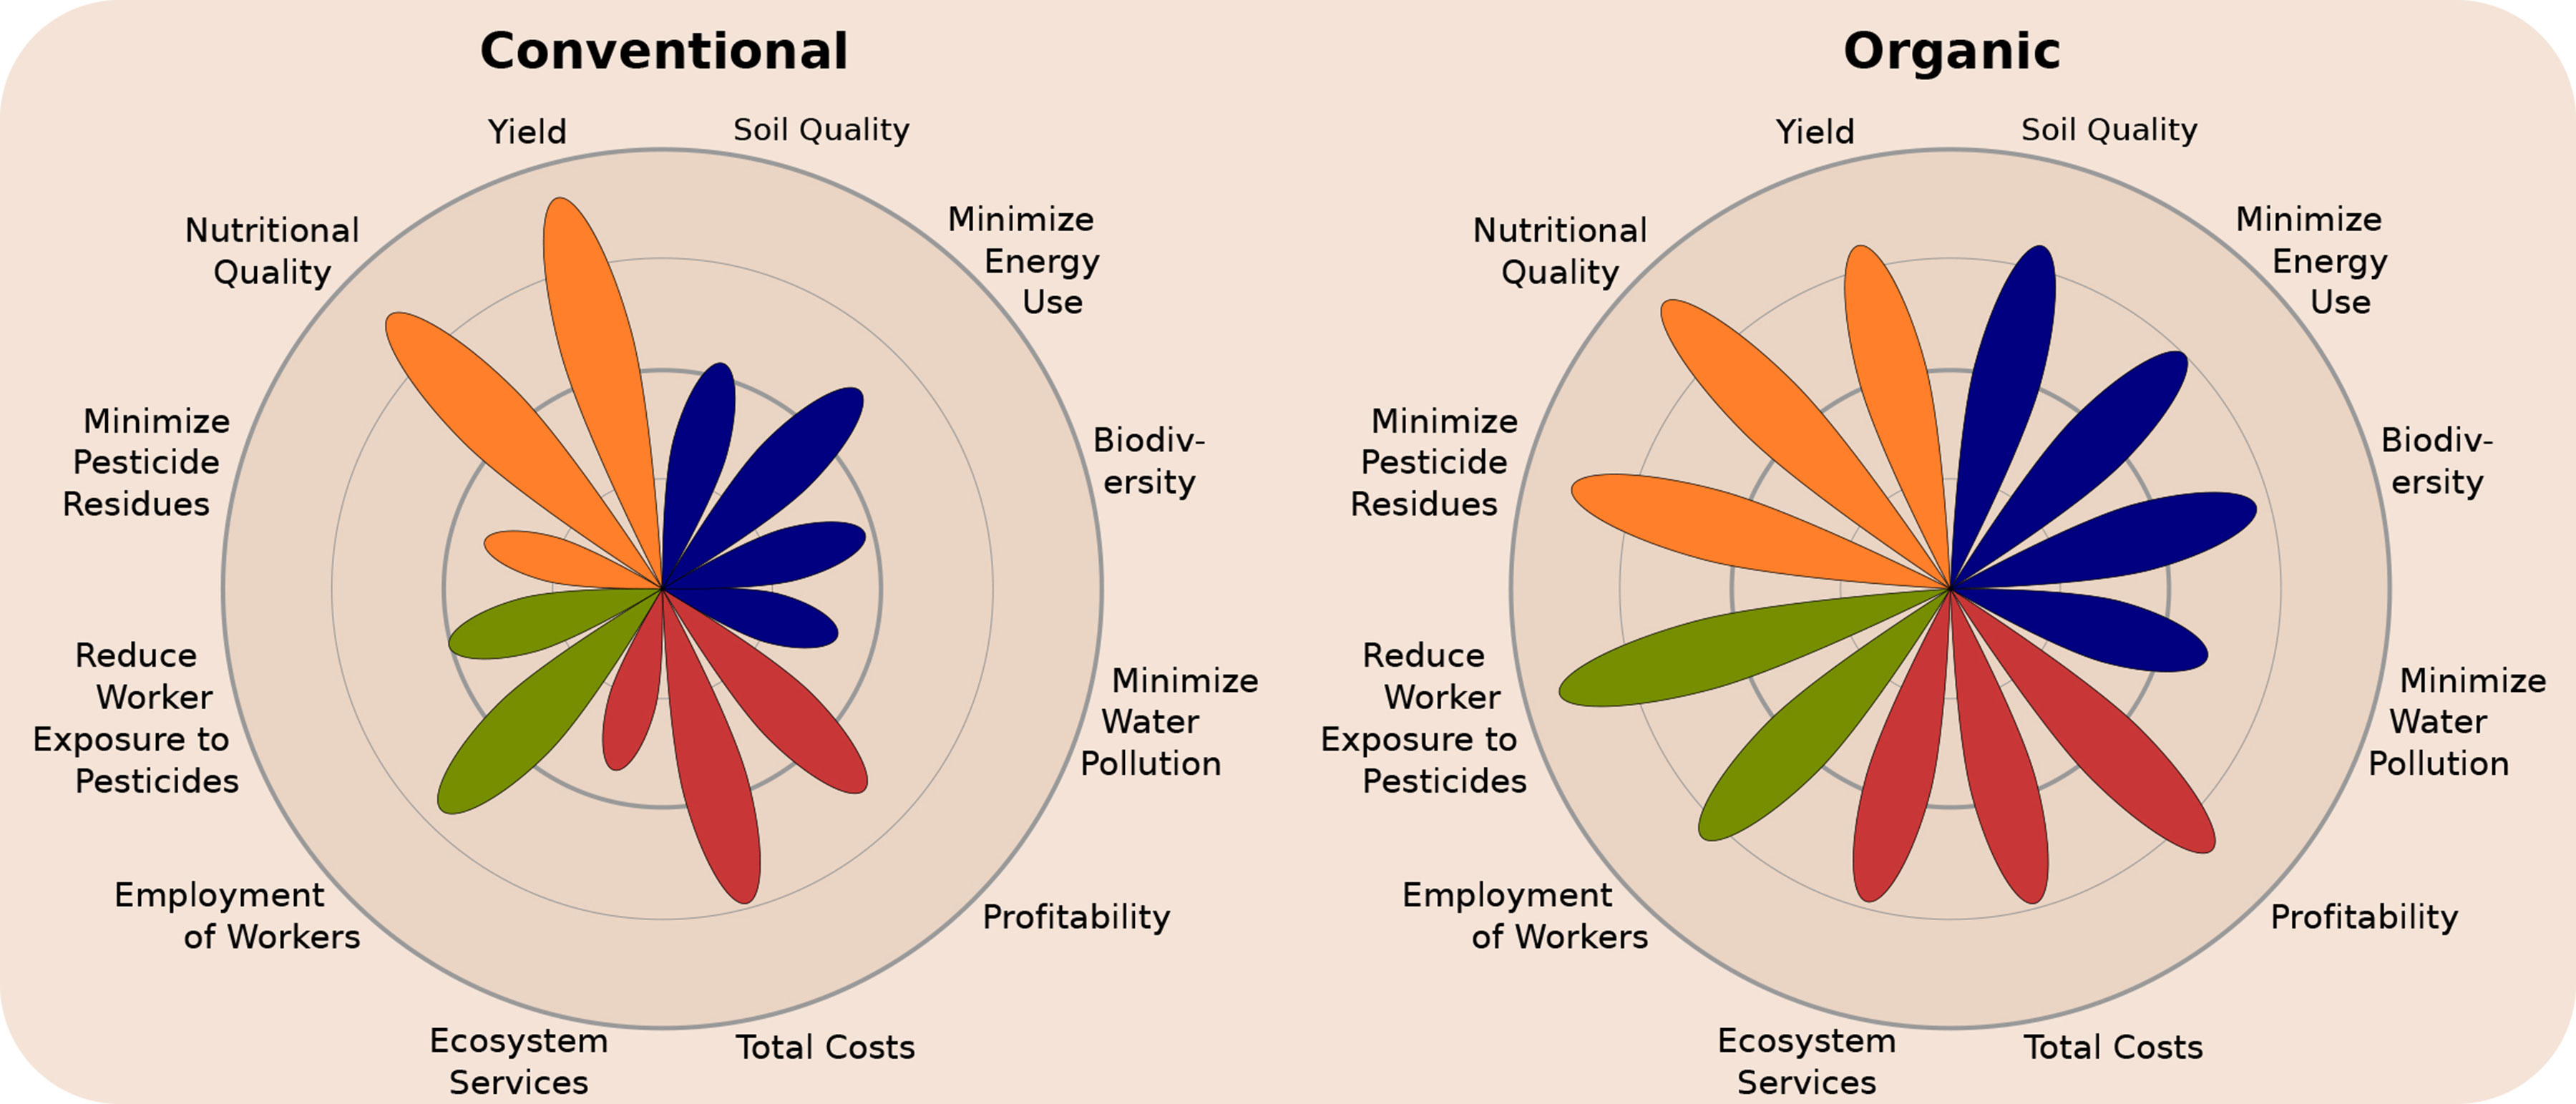 Comparison chart of ecological, environmental, and economic benefits in conventional and organic agriculture.